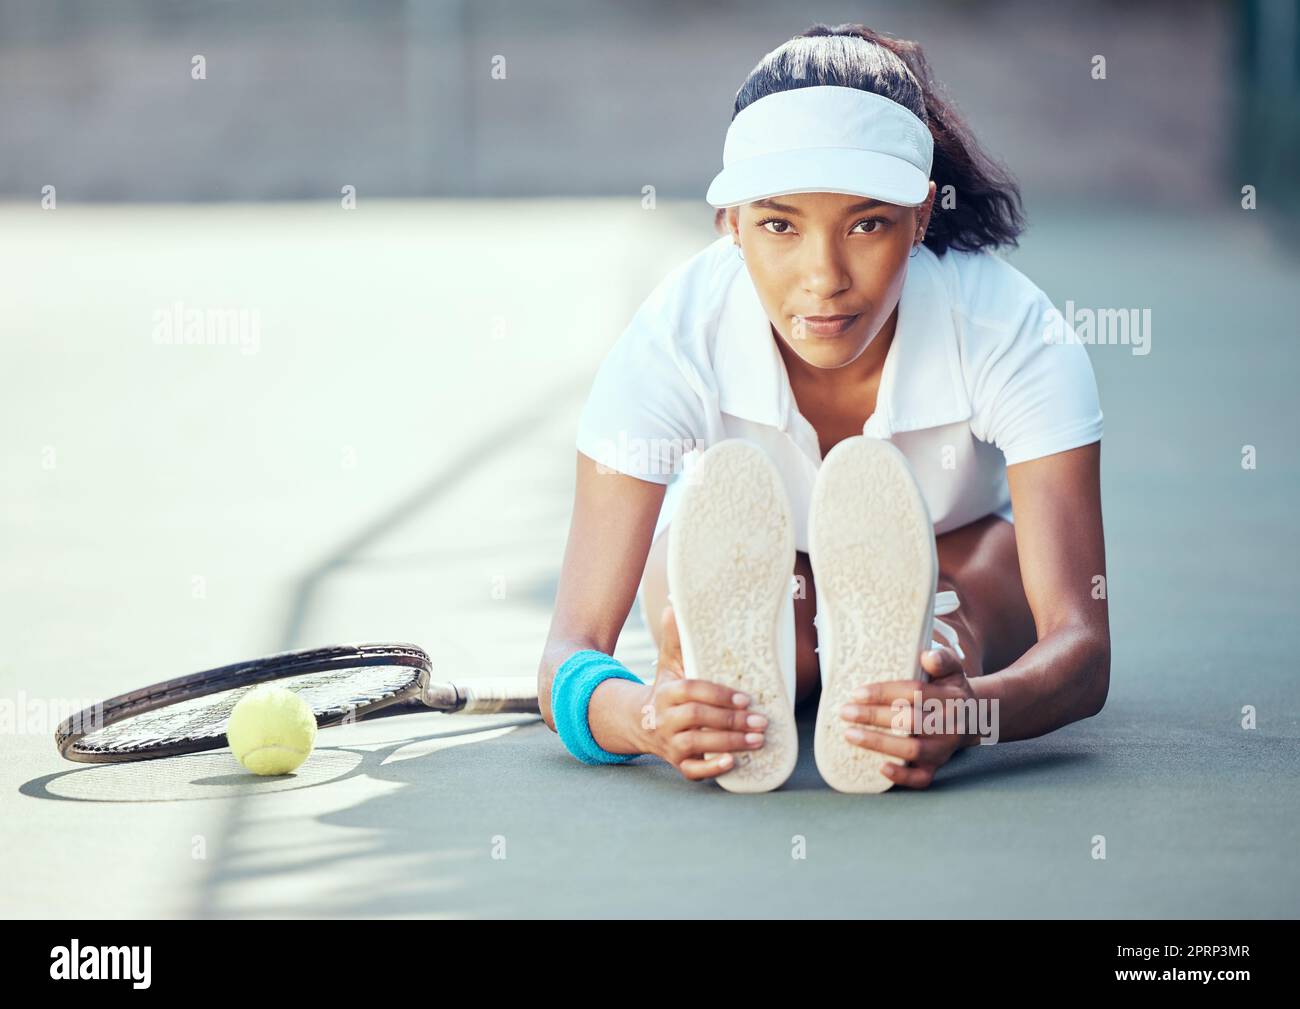 Tennis, sport and exercise with a woman stretching to warmup before a game or match on an outdoor court. Health fitness and sports with a female player getting ready for a workout and practice Stock Photo